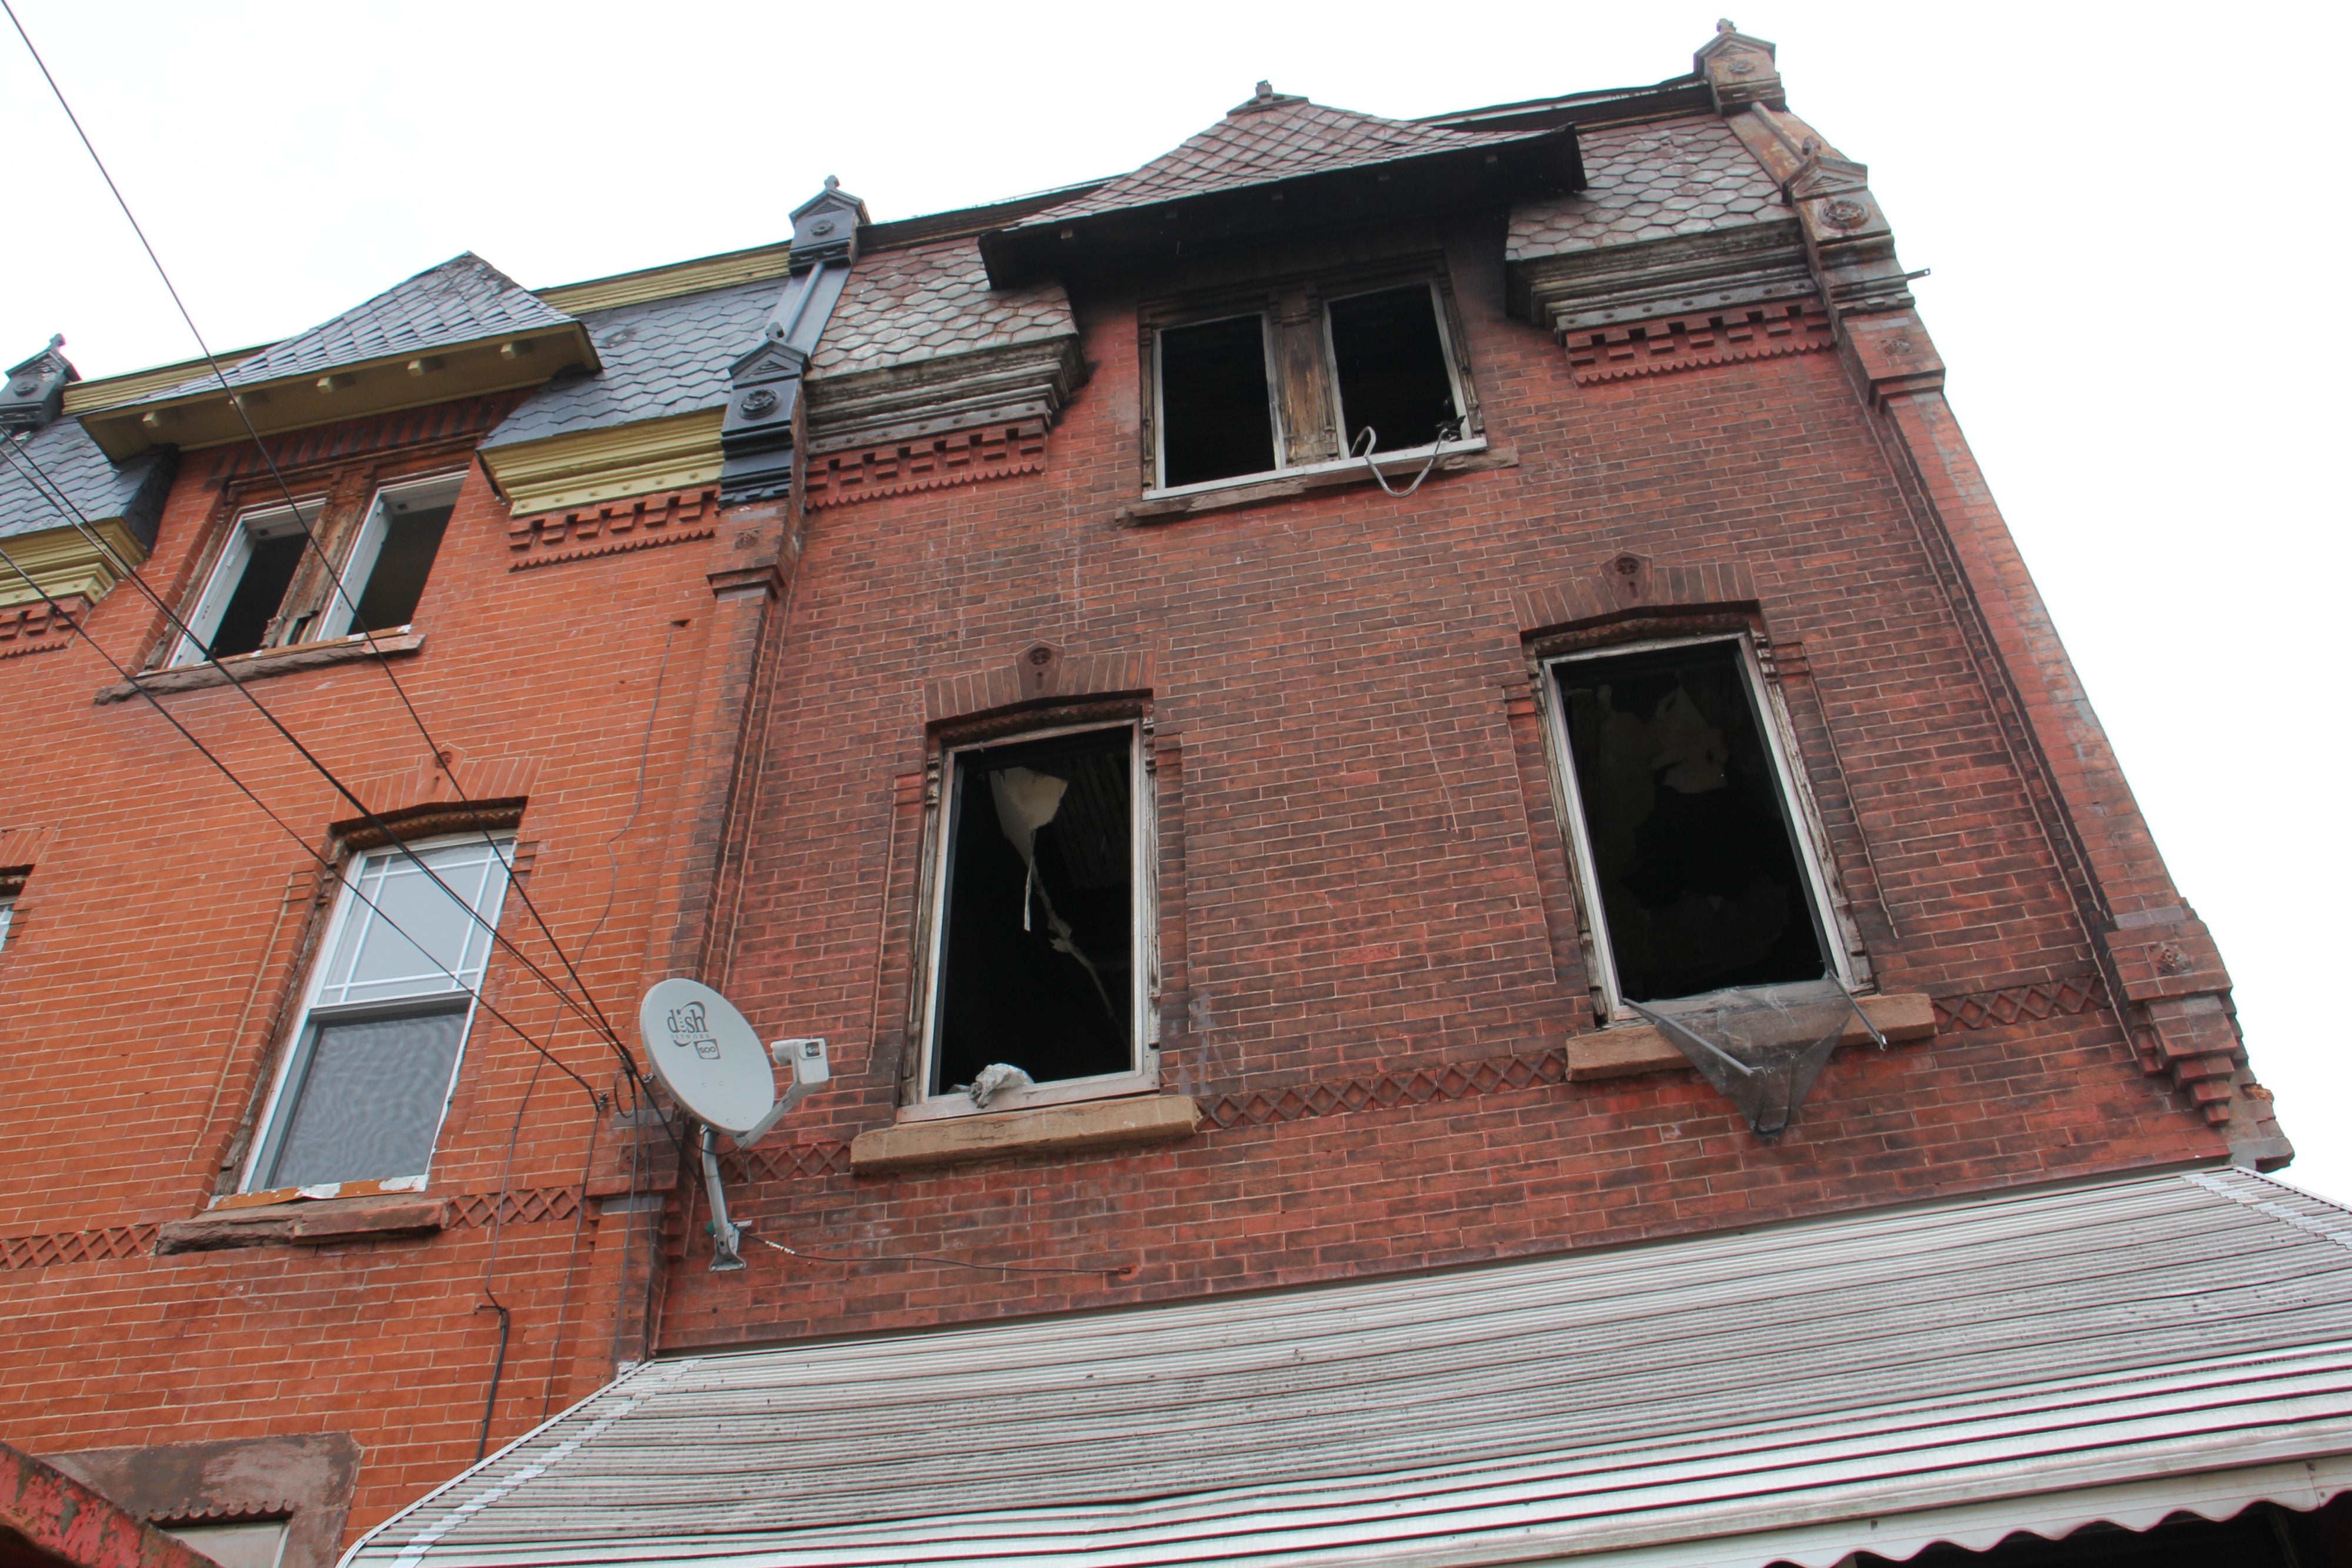 Fairmount fire: City officials offer policy change